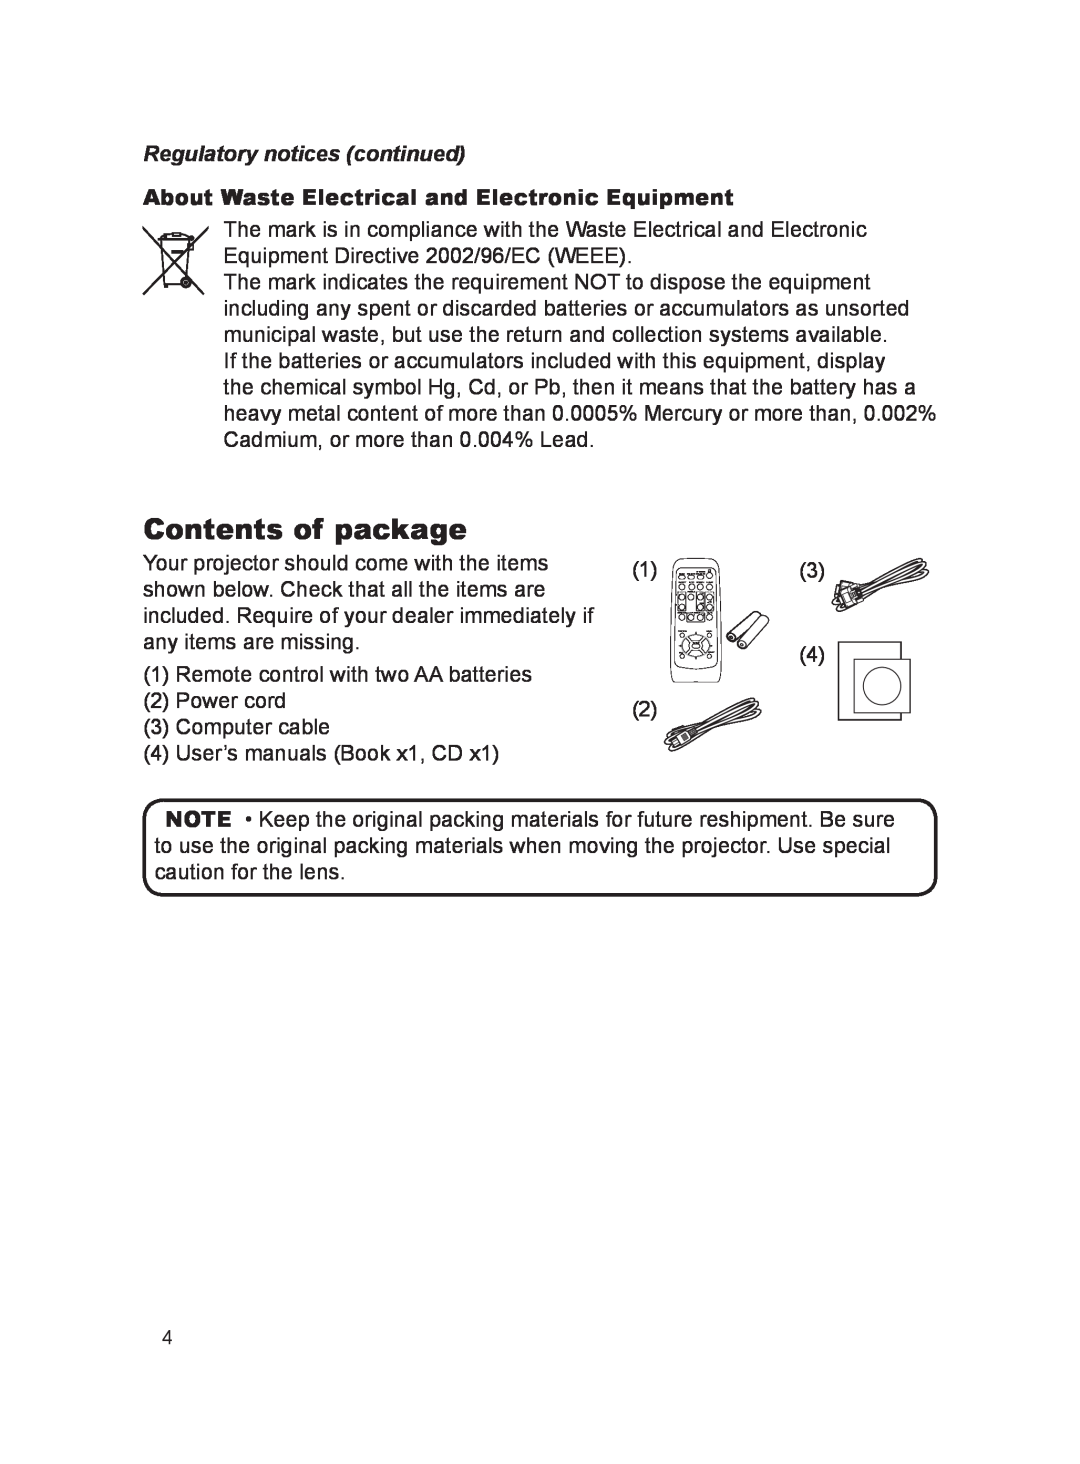 Dukane MODEL 8788 Contents of package, Regulatory notices continued, About Waste Electrical and Electronic Equipment 